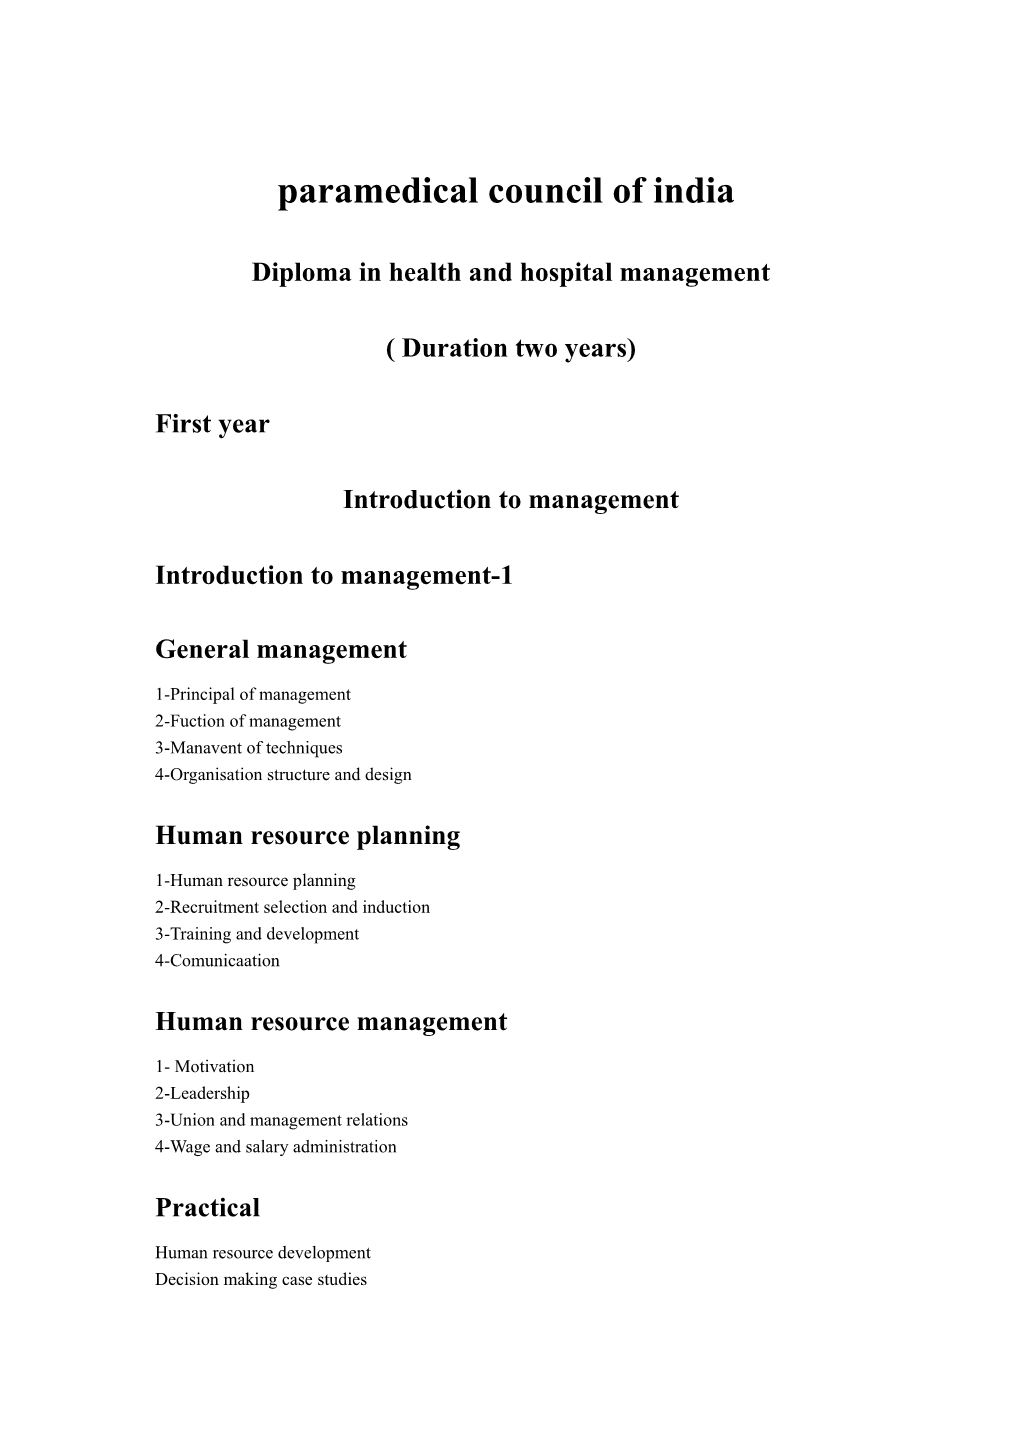 Diploma in Health and Hospital Management